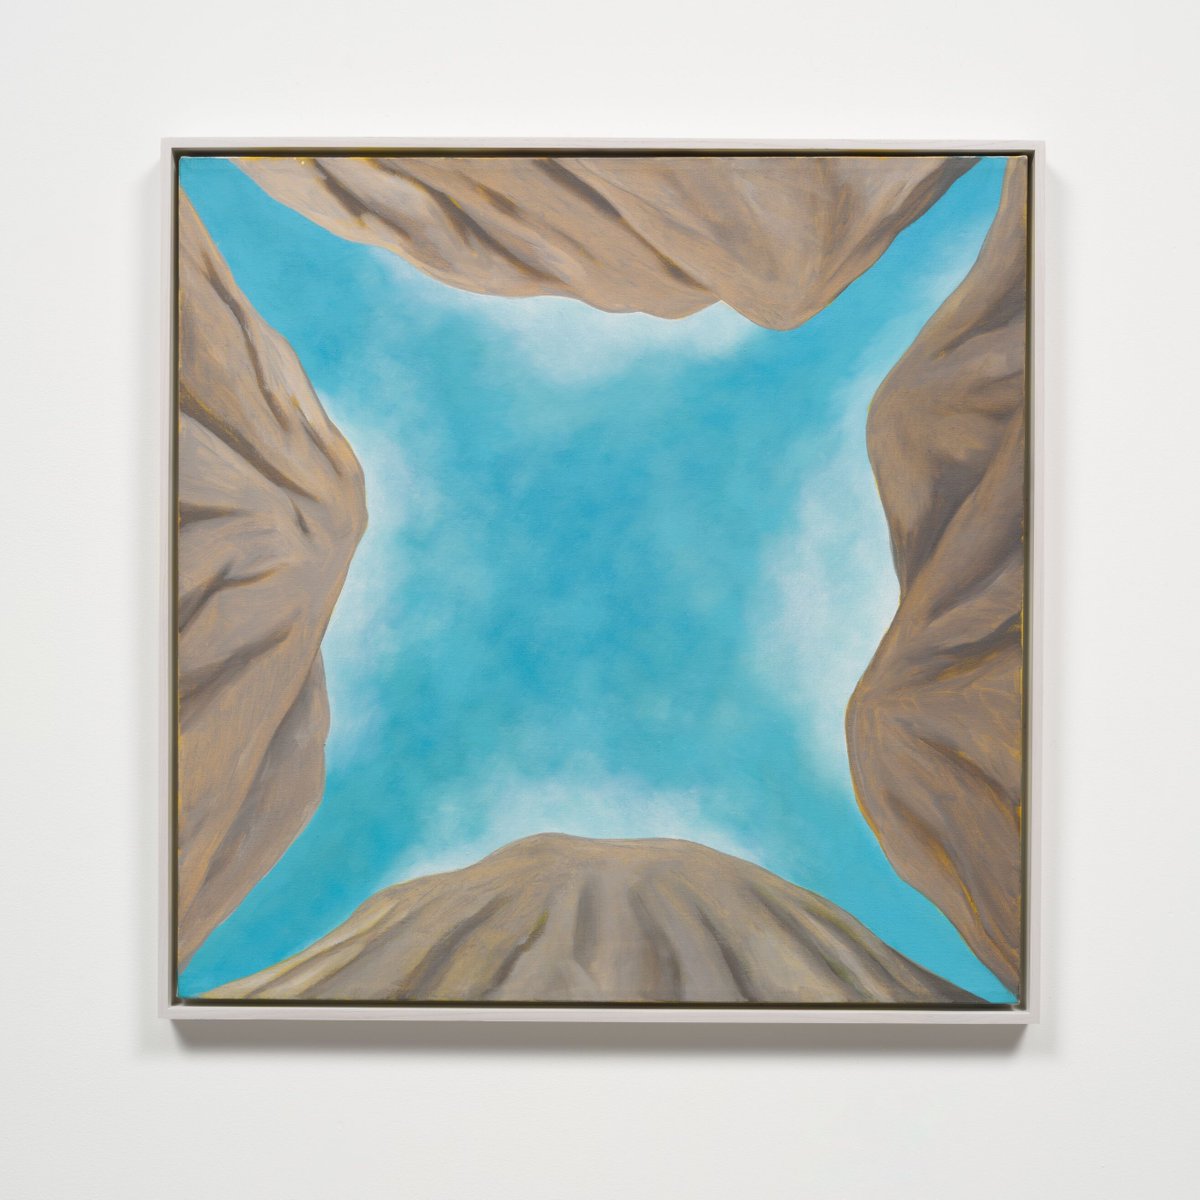 On view this week at @ArtBasel Miami Beach. 
Stop by the @HauserWirth booth to see in person. 

Luchita Hurtado
A Sky Skin, 1987
Oil on canvas
31 x 31 inches

#LuchitaHurtado
#artbaselmiamibeach 
#abmb